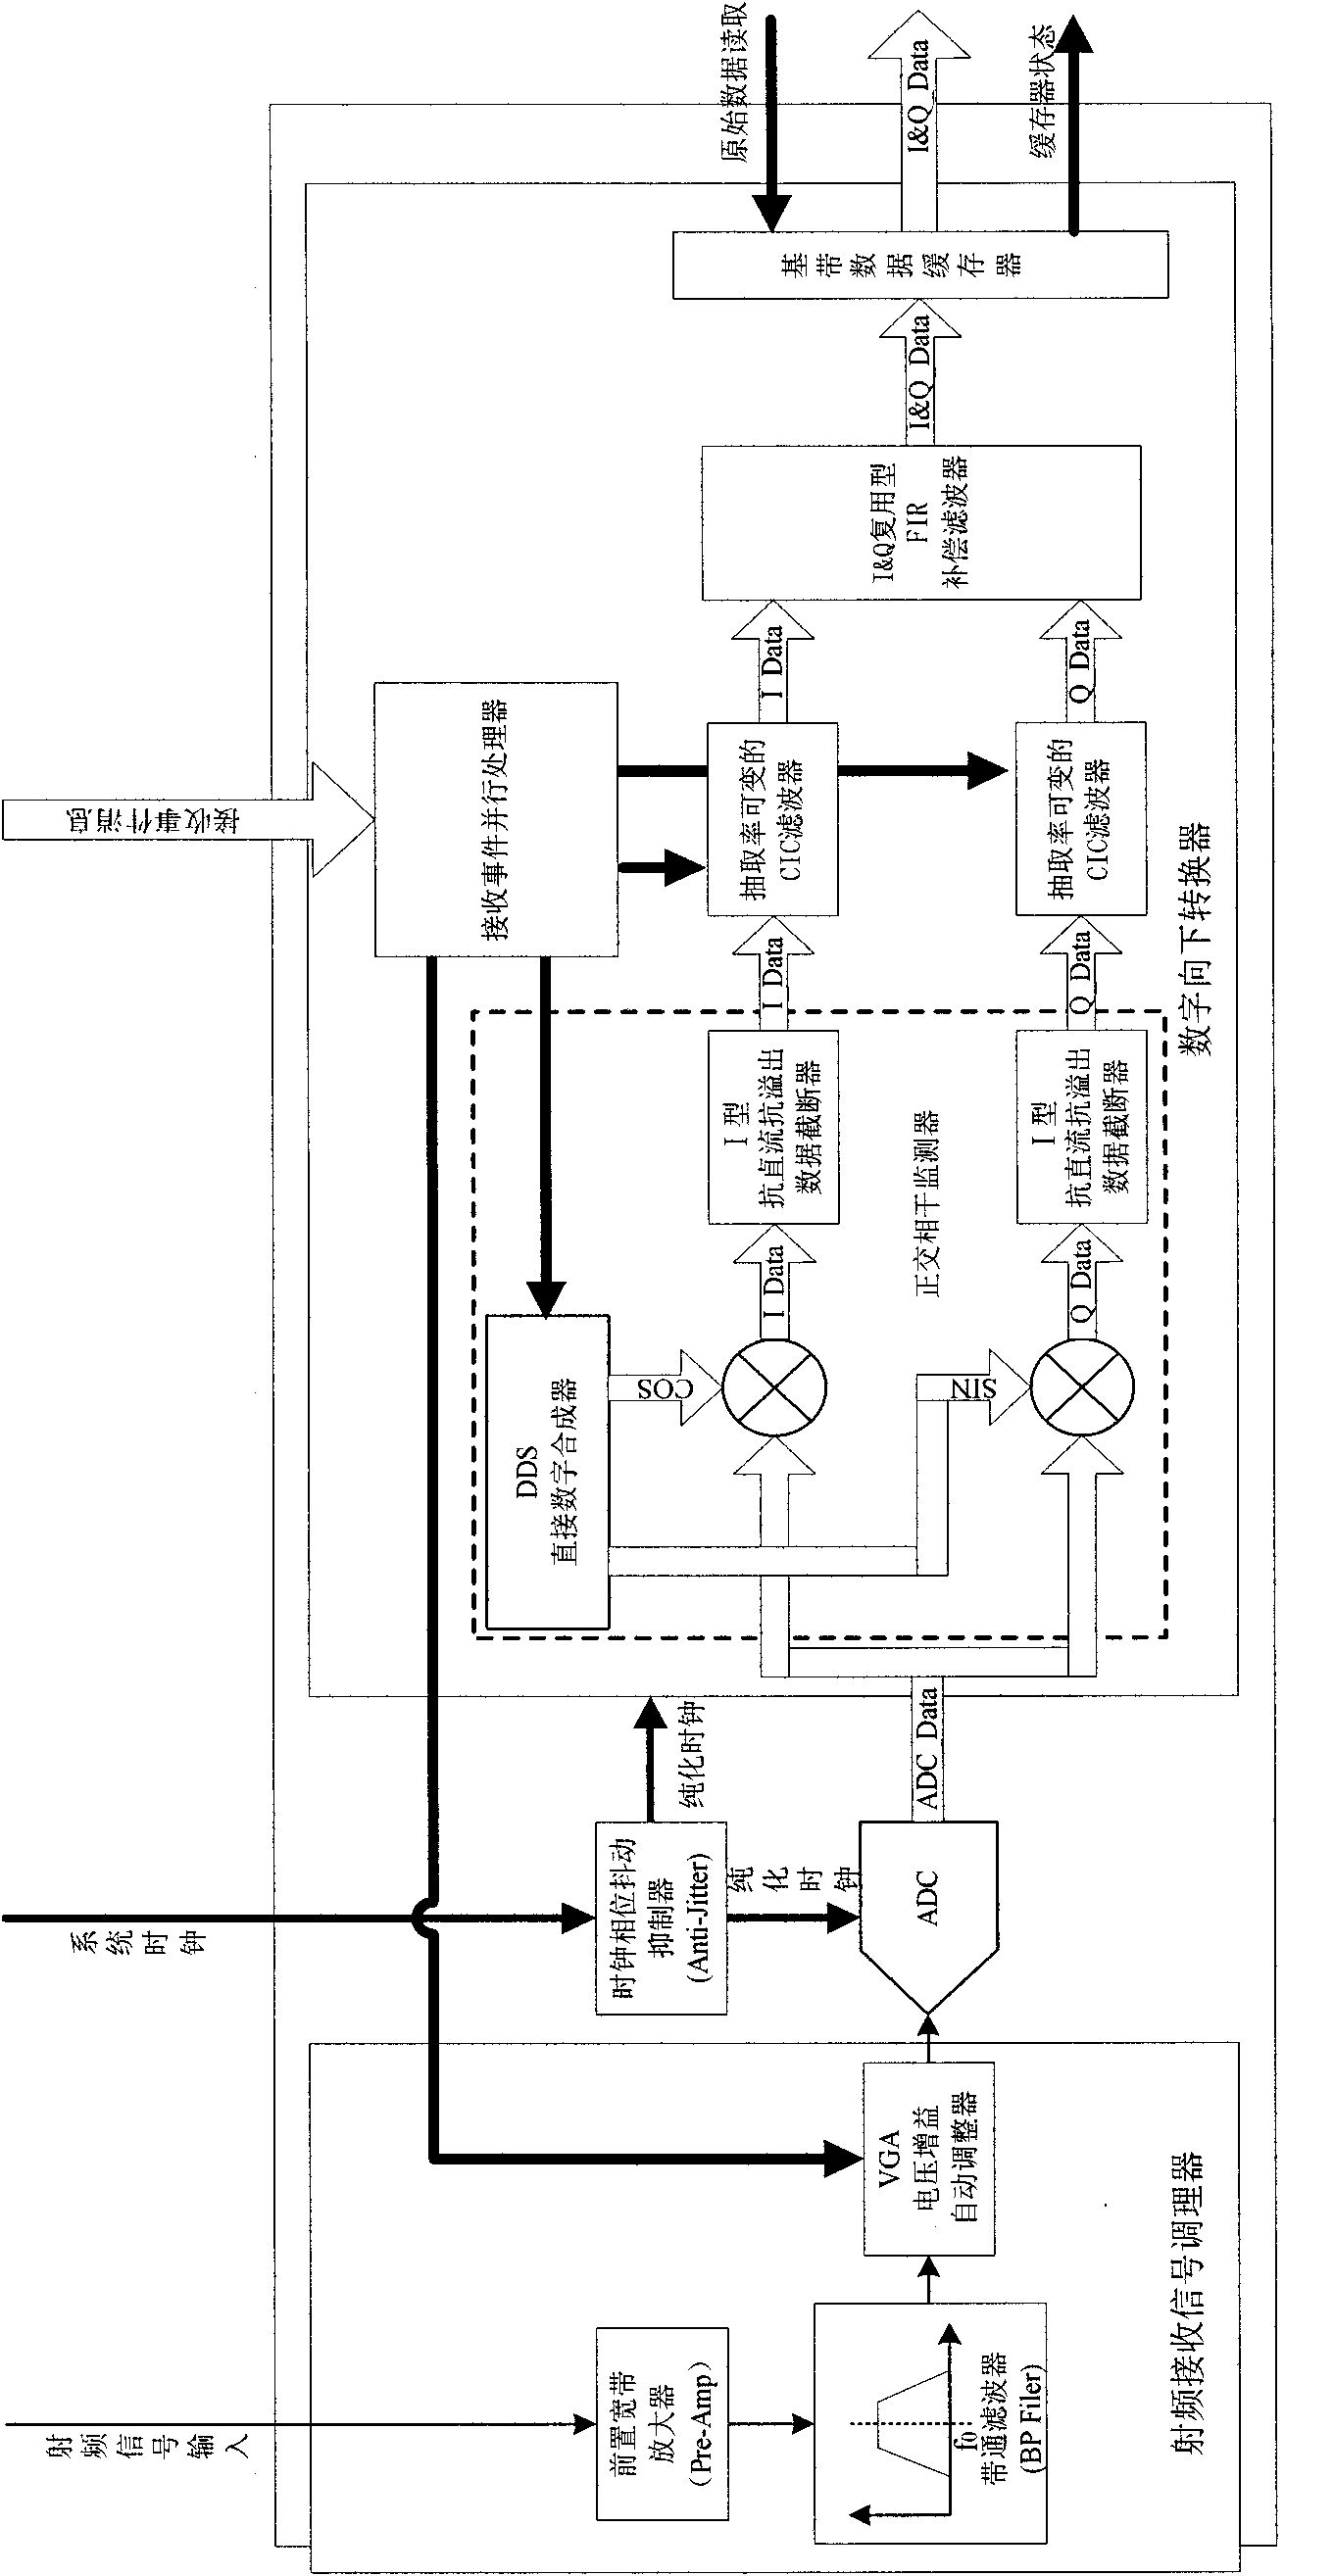 Device and method for realizing broadband digital magnetic resonance radio frequency receiving